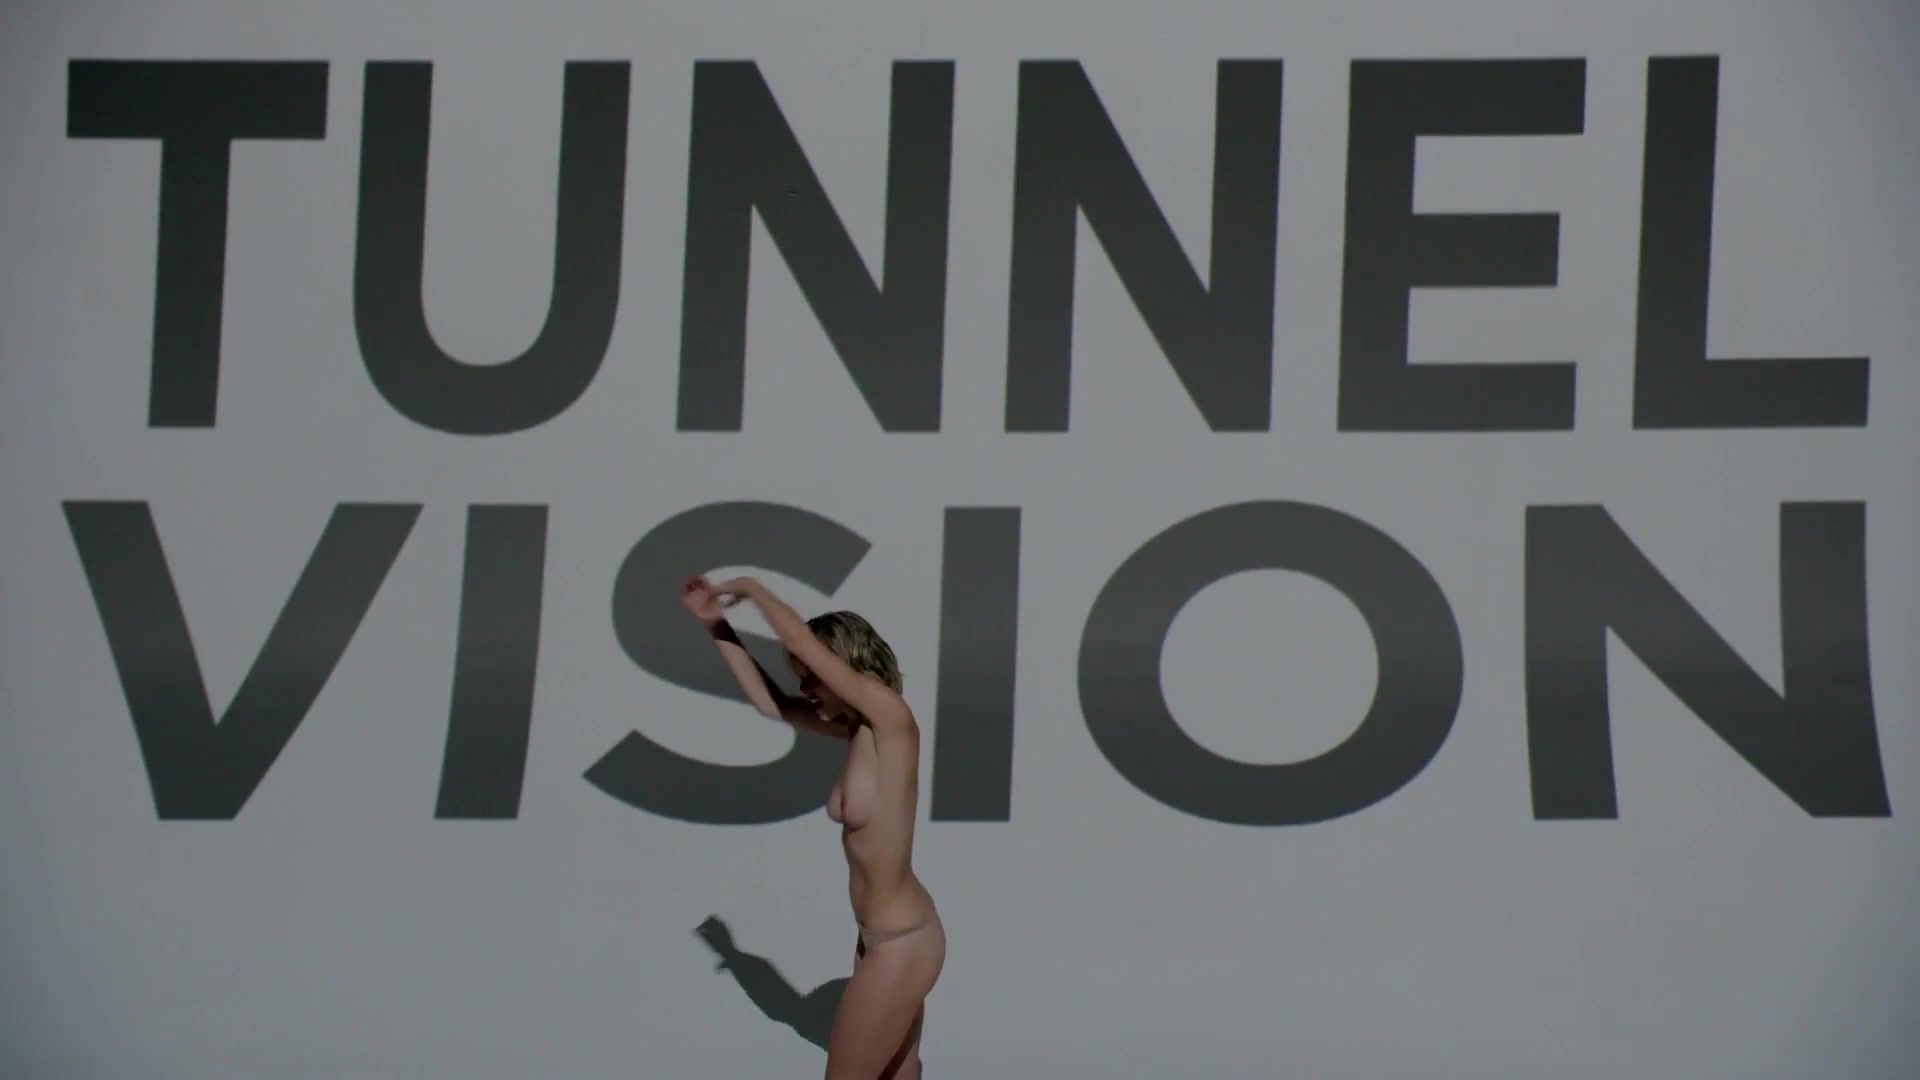 Missionary Position Porn Felicia Porter, Laura Shields Naked - Tunnel Vision (2013, Explicit) - Justin Timberlake Masseuse - 1